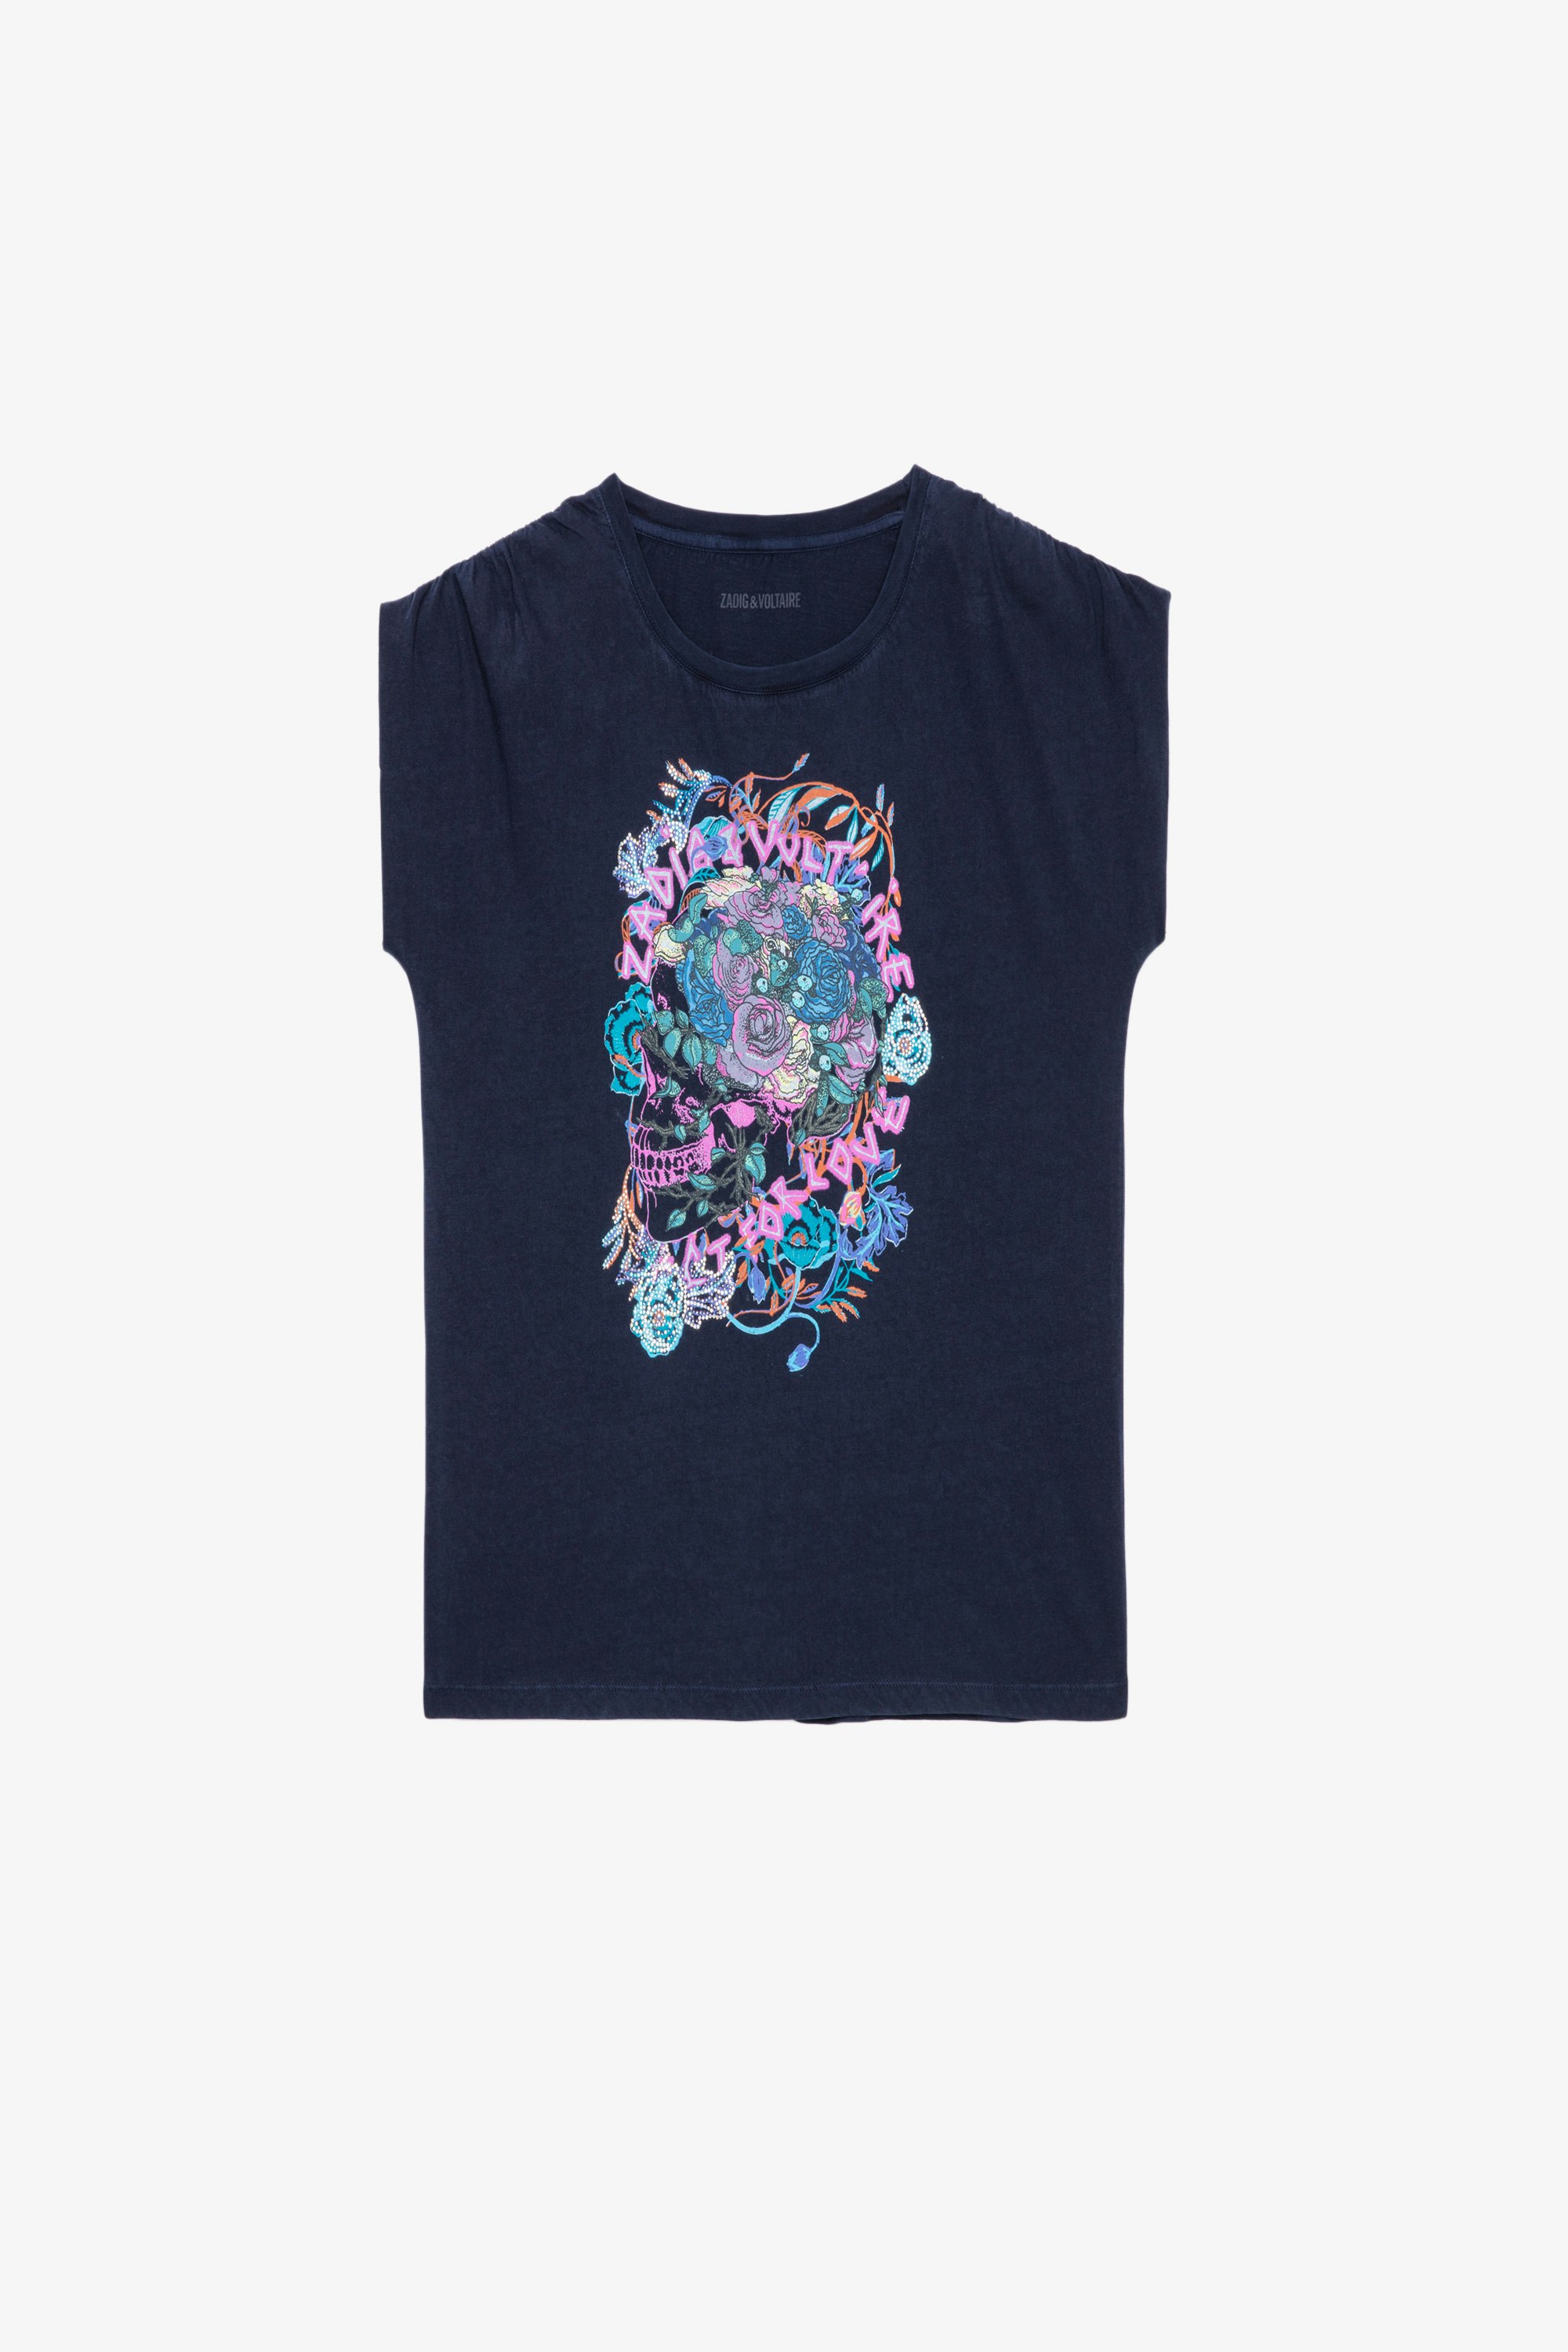 Adele T-shirt Women’s navy blue cotton T-shirt with a skull print, round neck and short sleeves